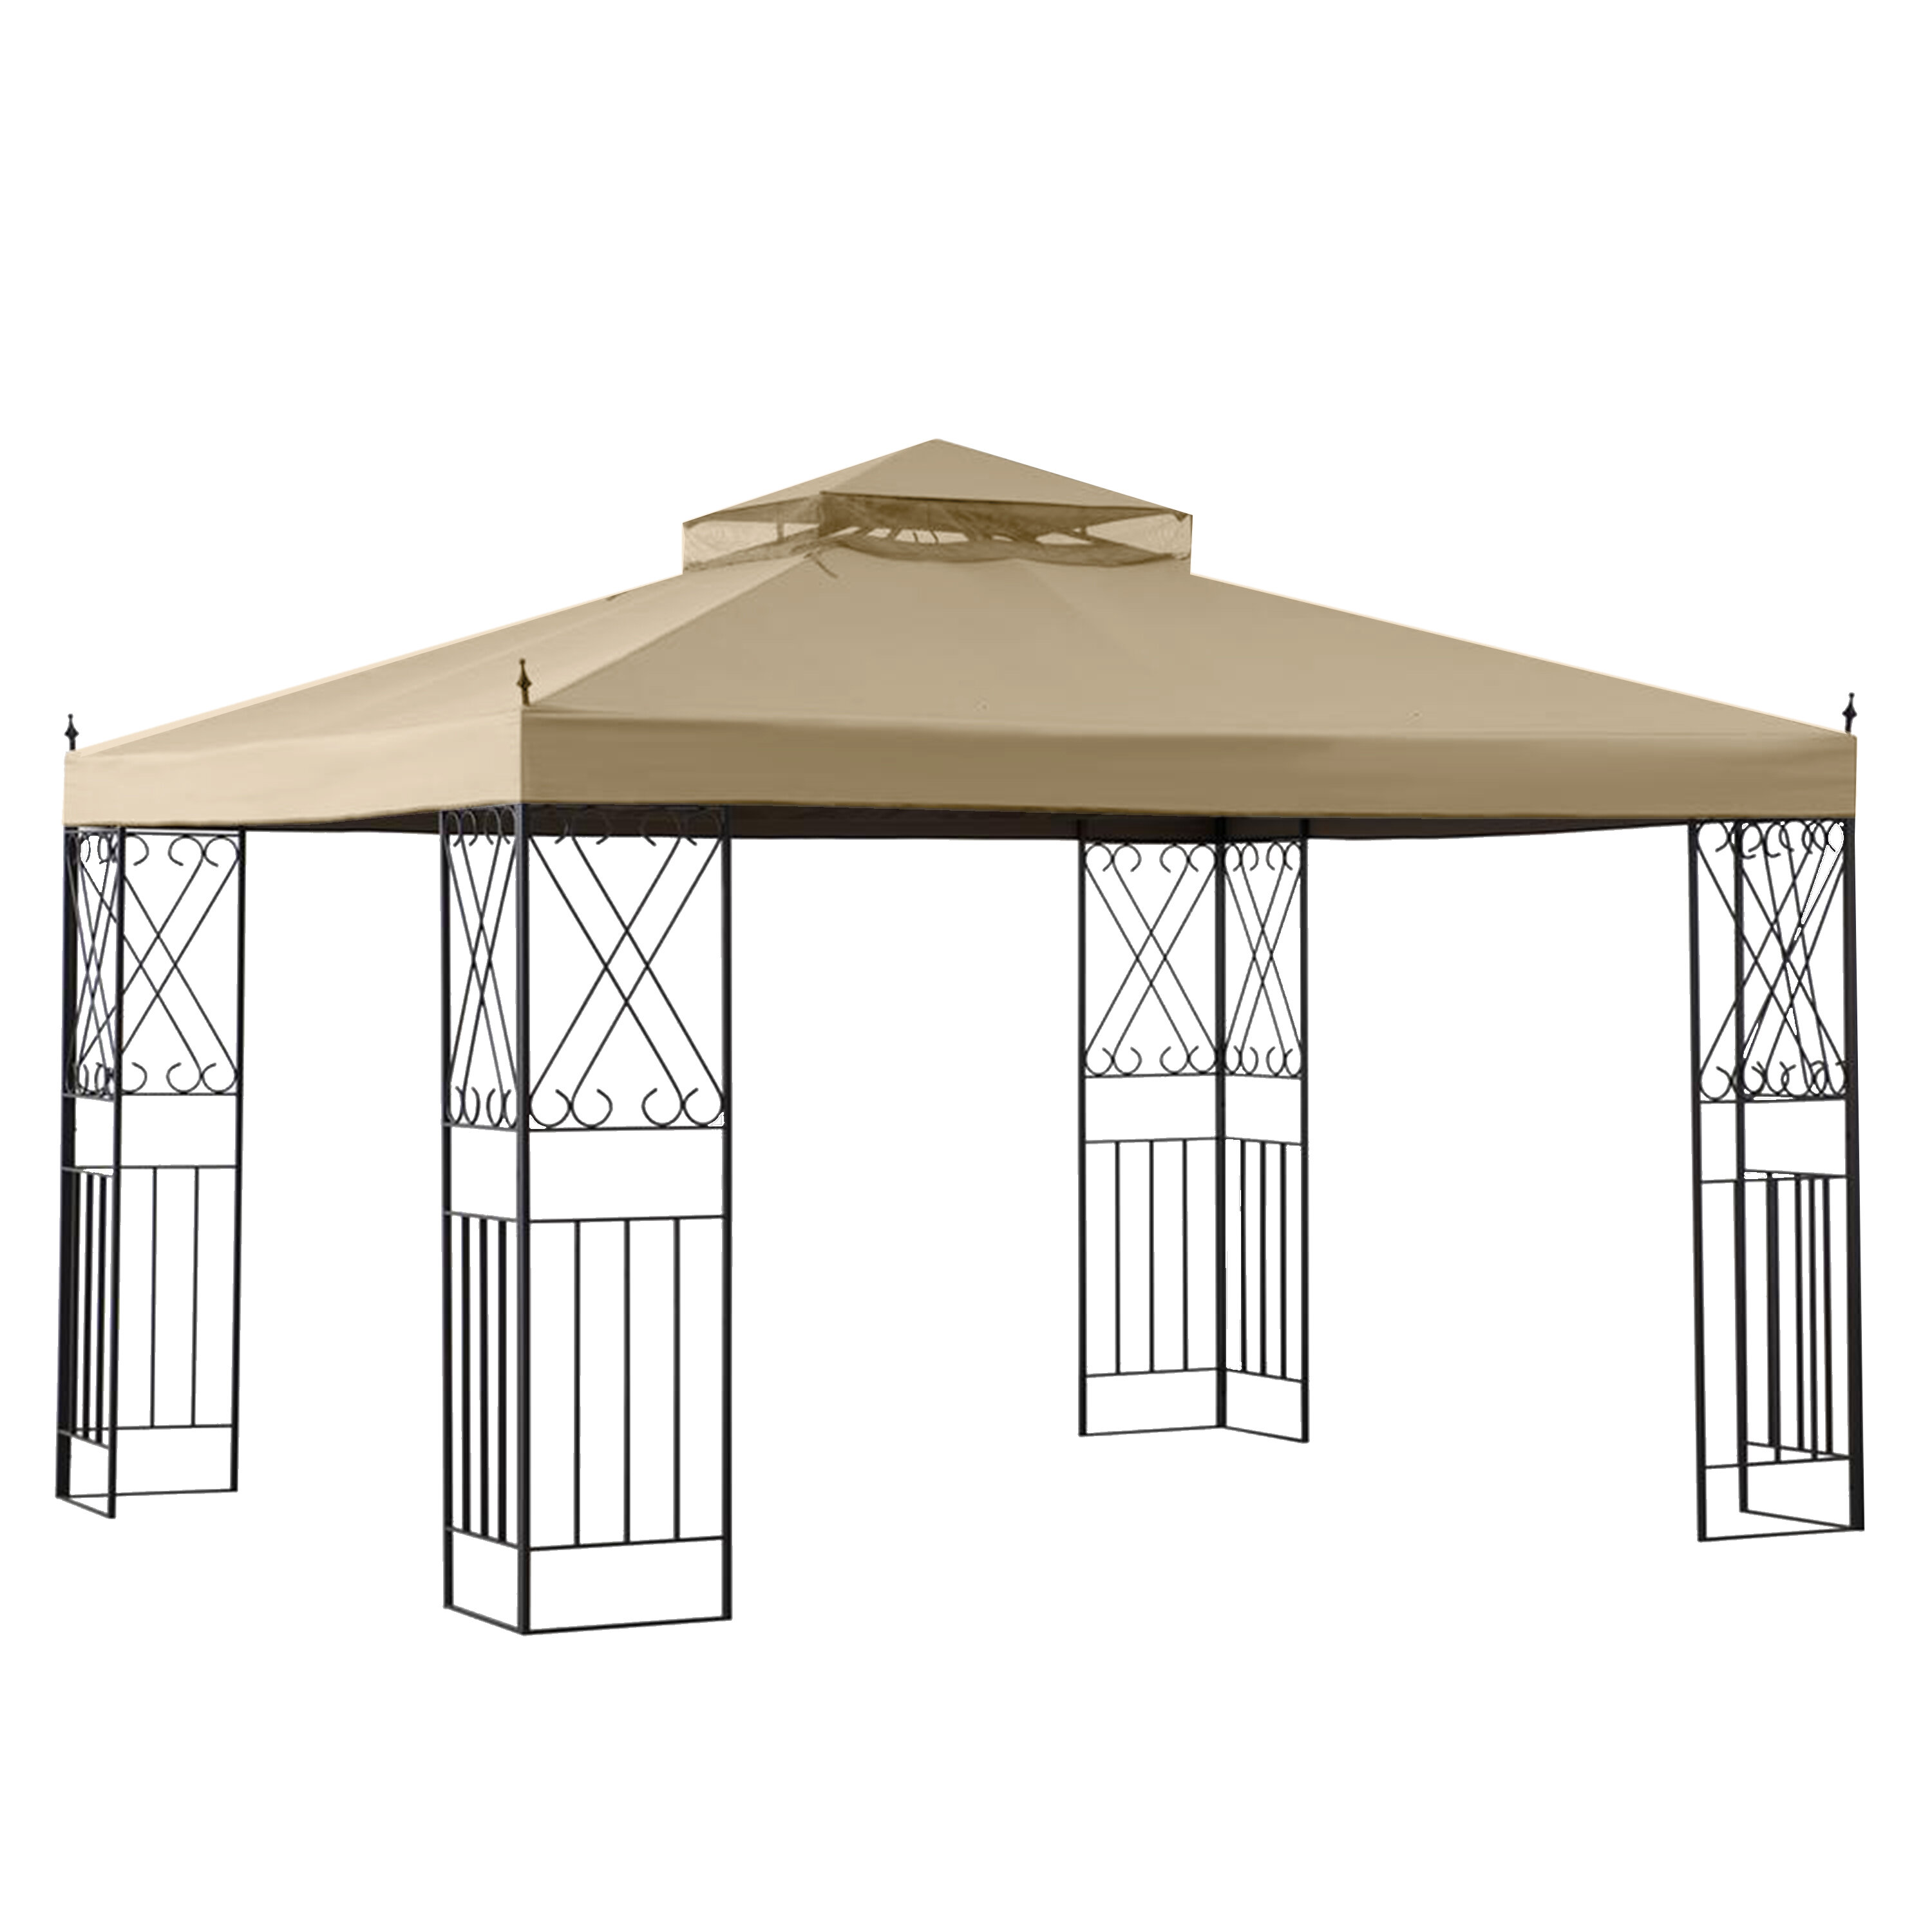 Patio Strong Camel Dual Tier Gazebo Replacement 10 X 10 Canopy Top Cover Awning Roof Top Cover